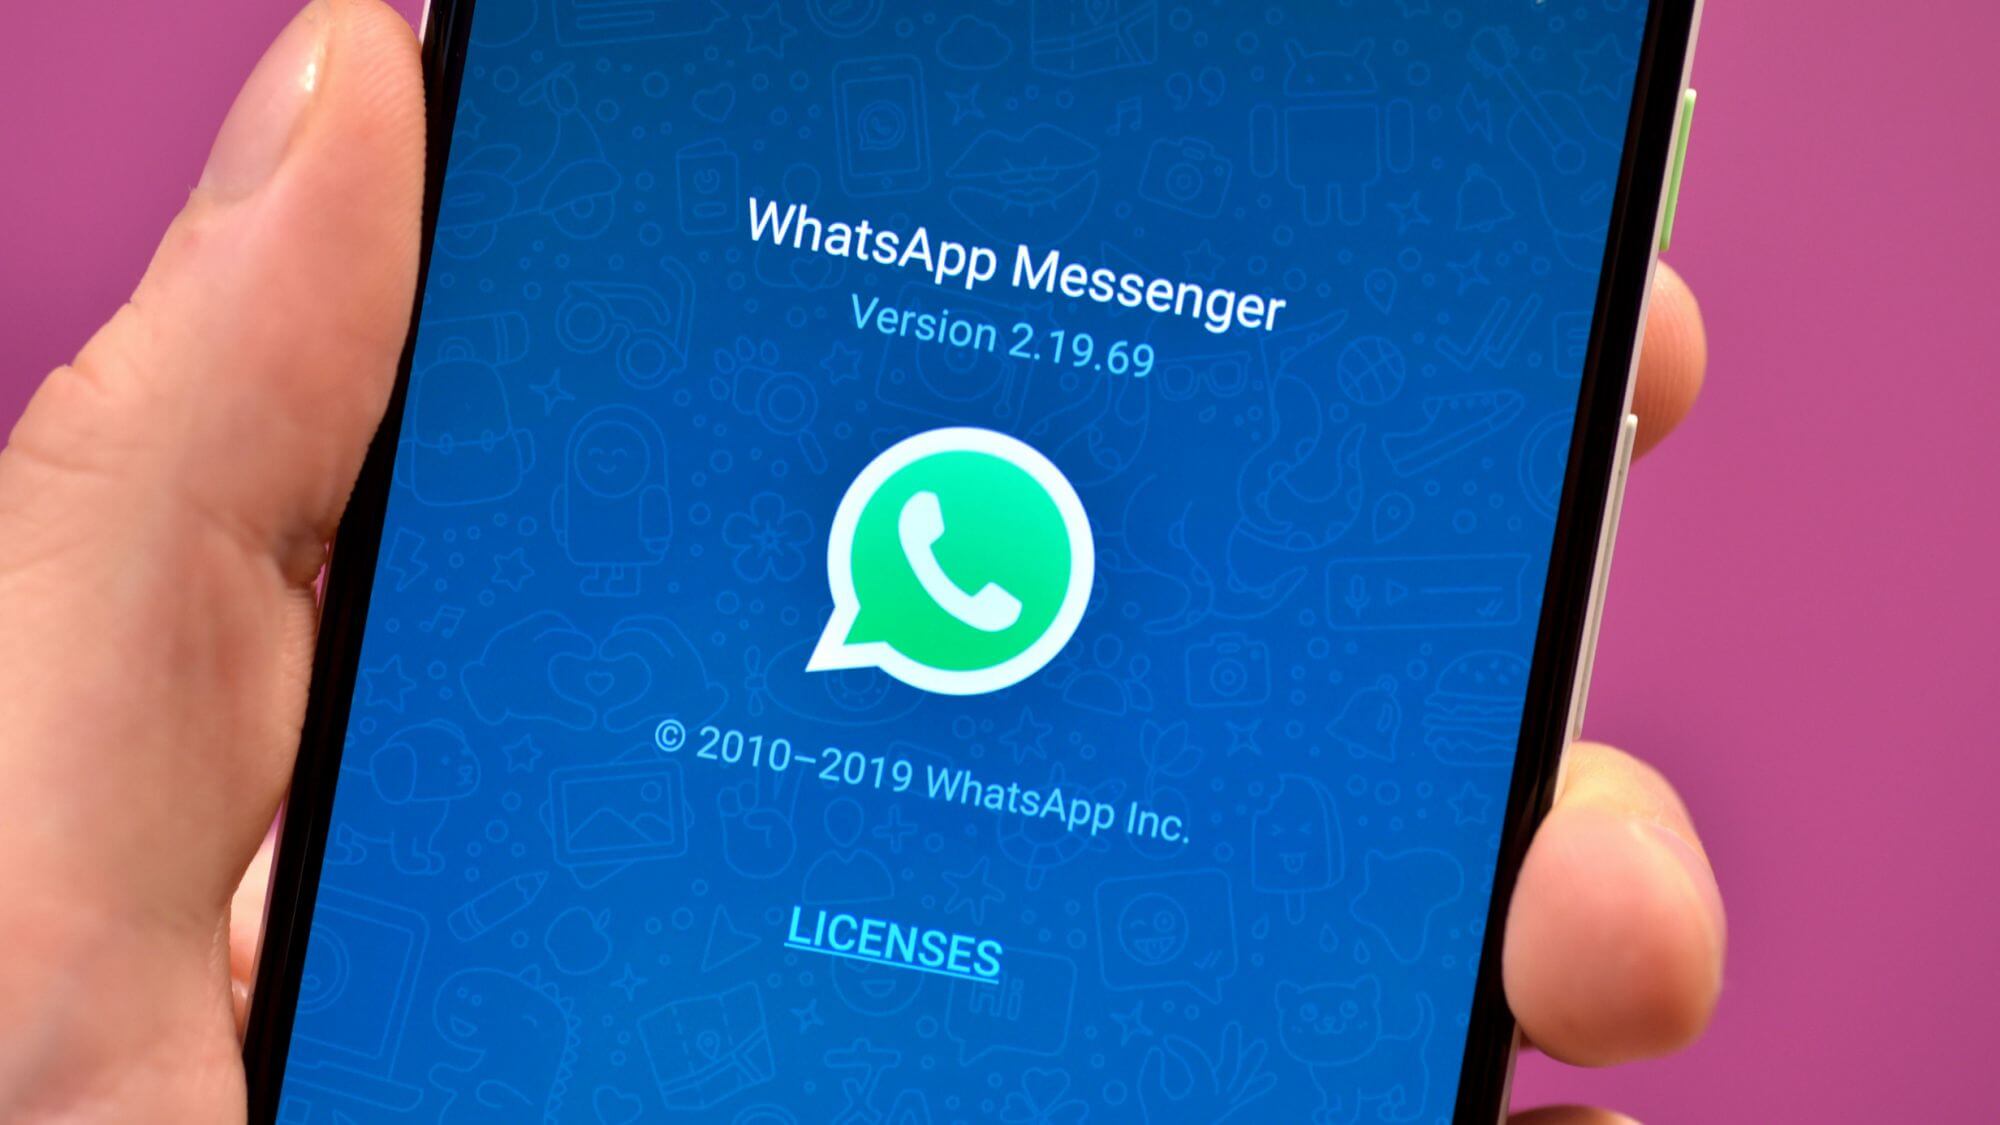 On New Year's Eve 2020, WhatsApp sets record with over 1.4 billion voice, video calls